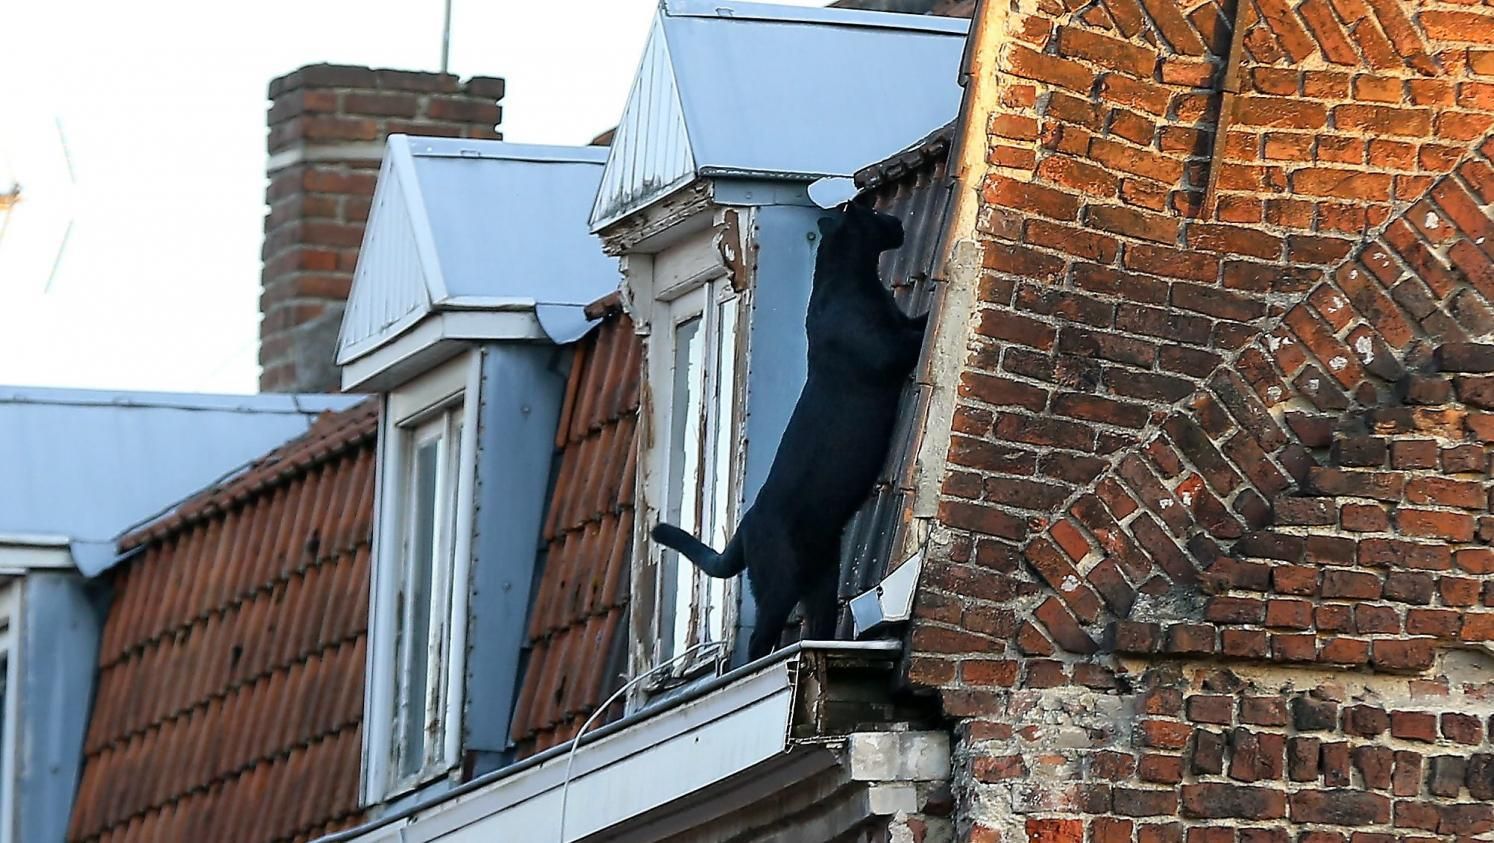 black panther caught prowling french rooftops